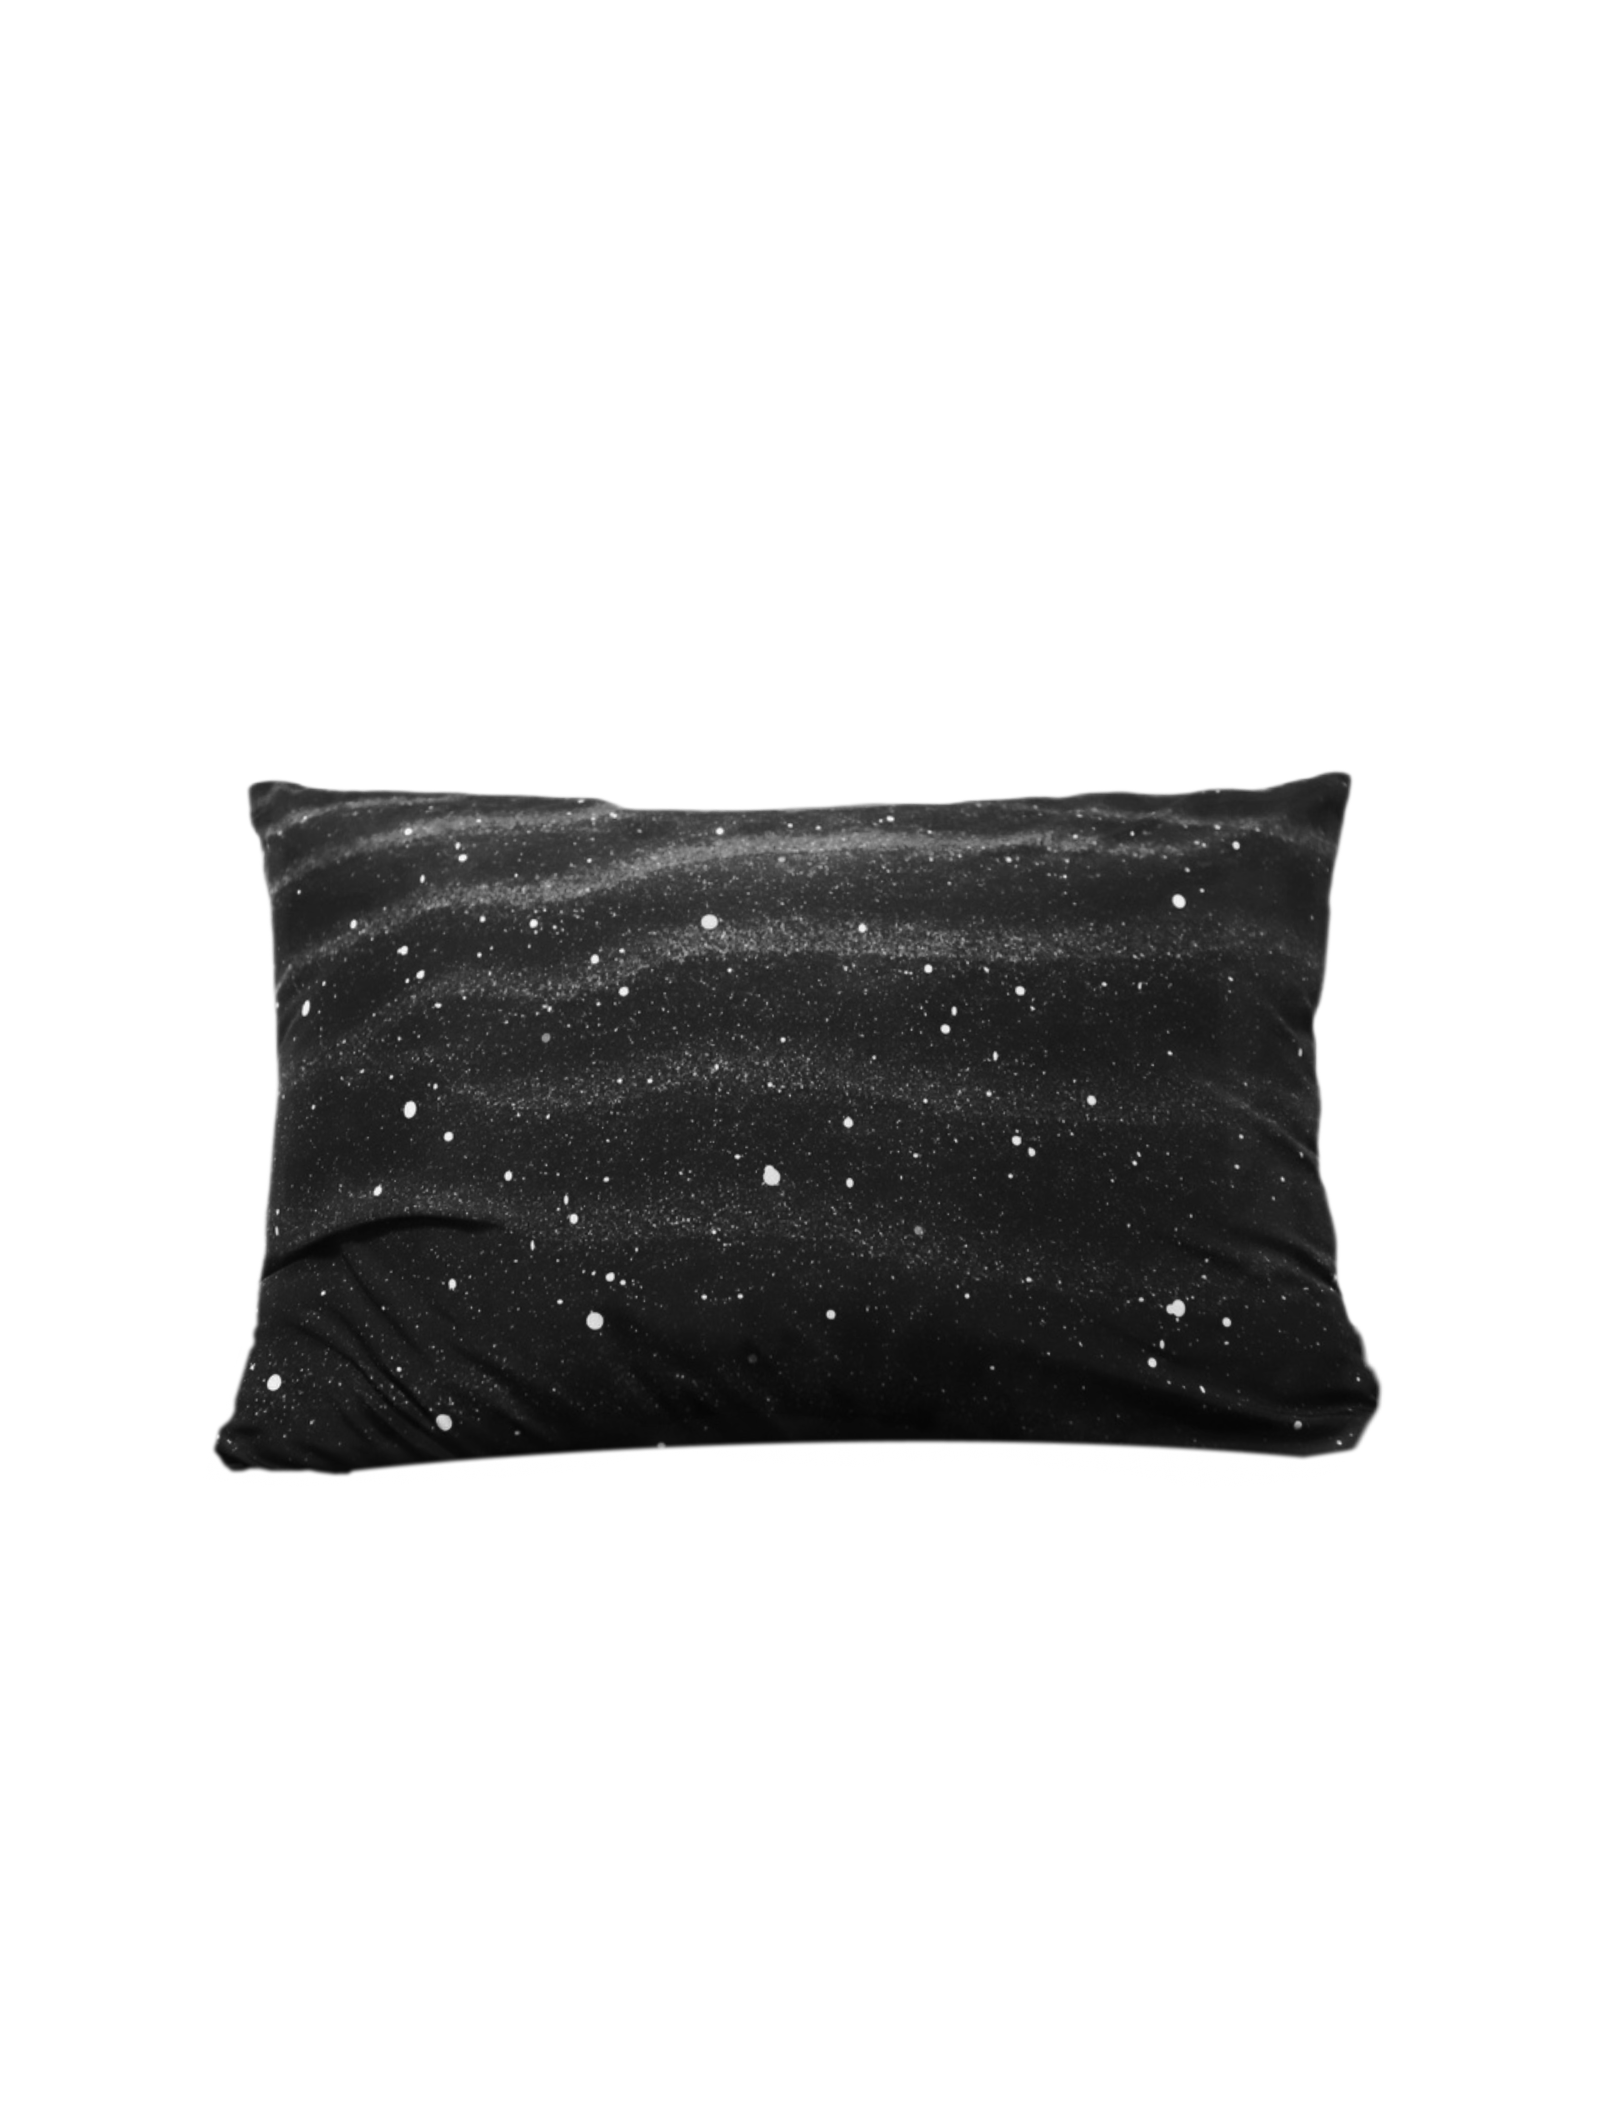 BLACK SAND PILLOW COVER